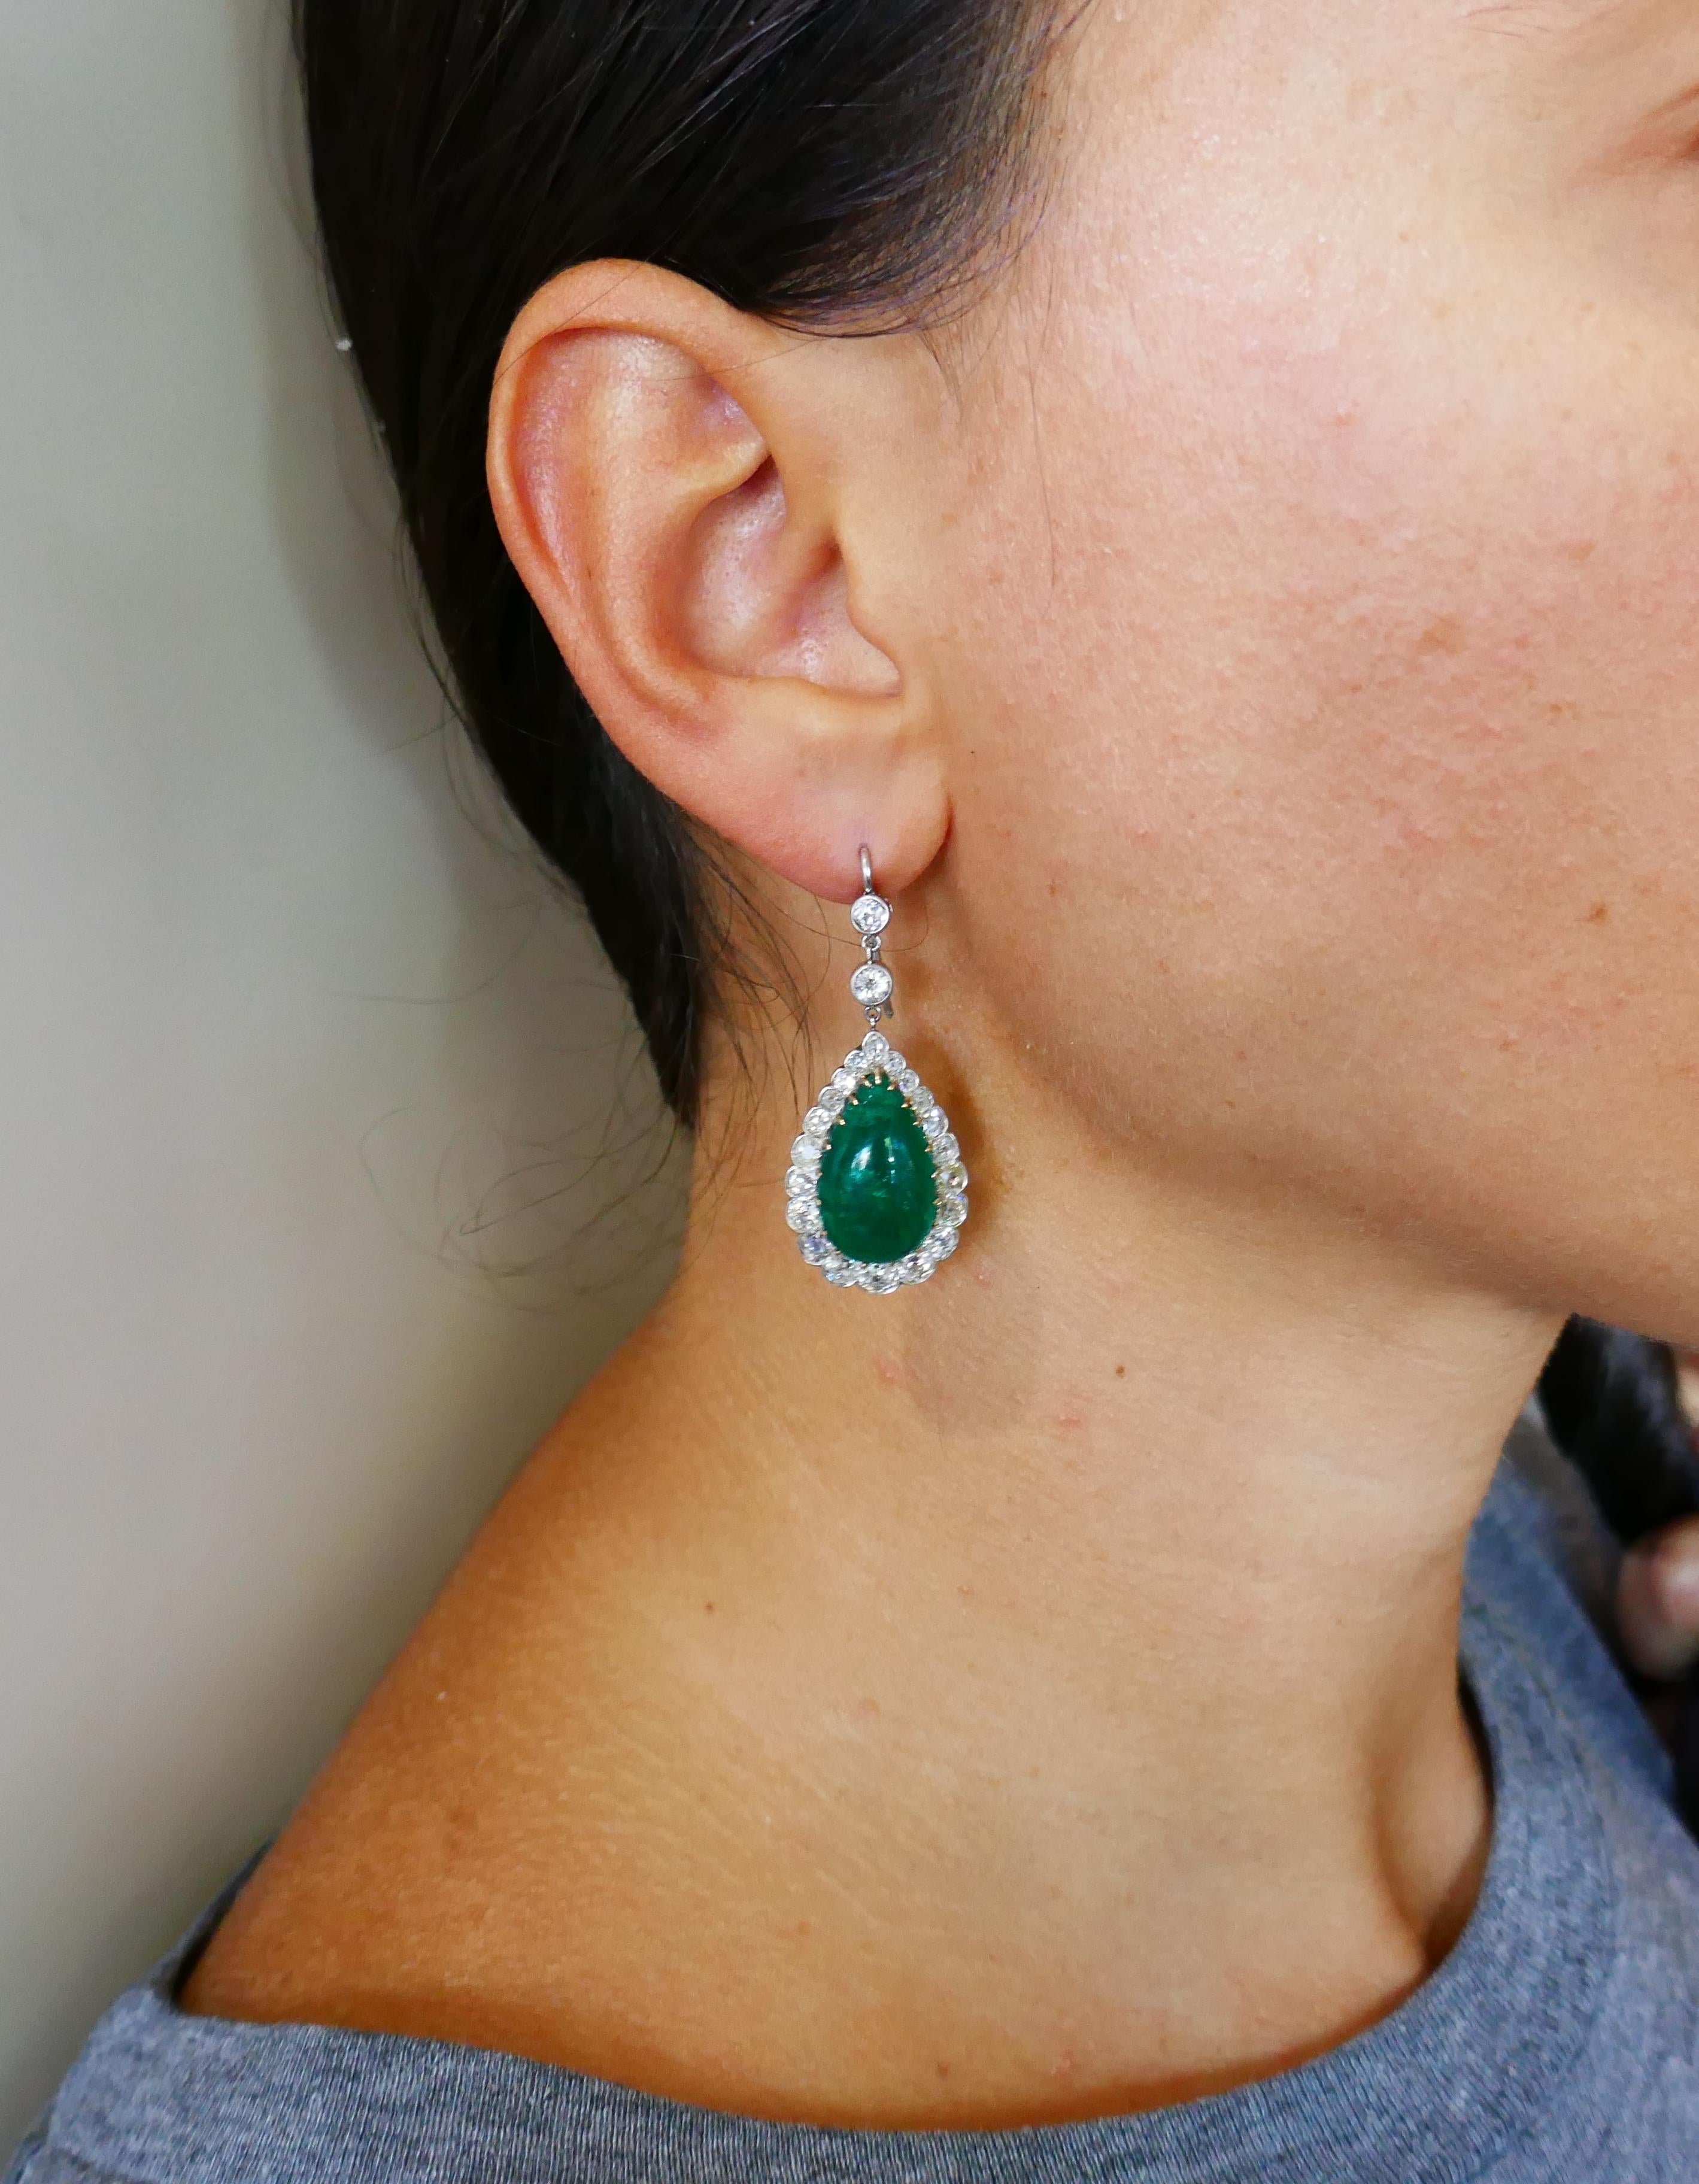 Classic emerald and diamond dangle earrings that are a great addition to your jewelry collection.
The earrings are made of 14 karat (tested) yellow gold and silver and feature cabochon emeralds framed with a row of old-mine and Old European cut